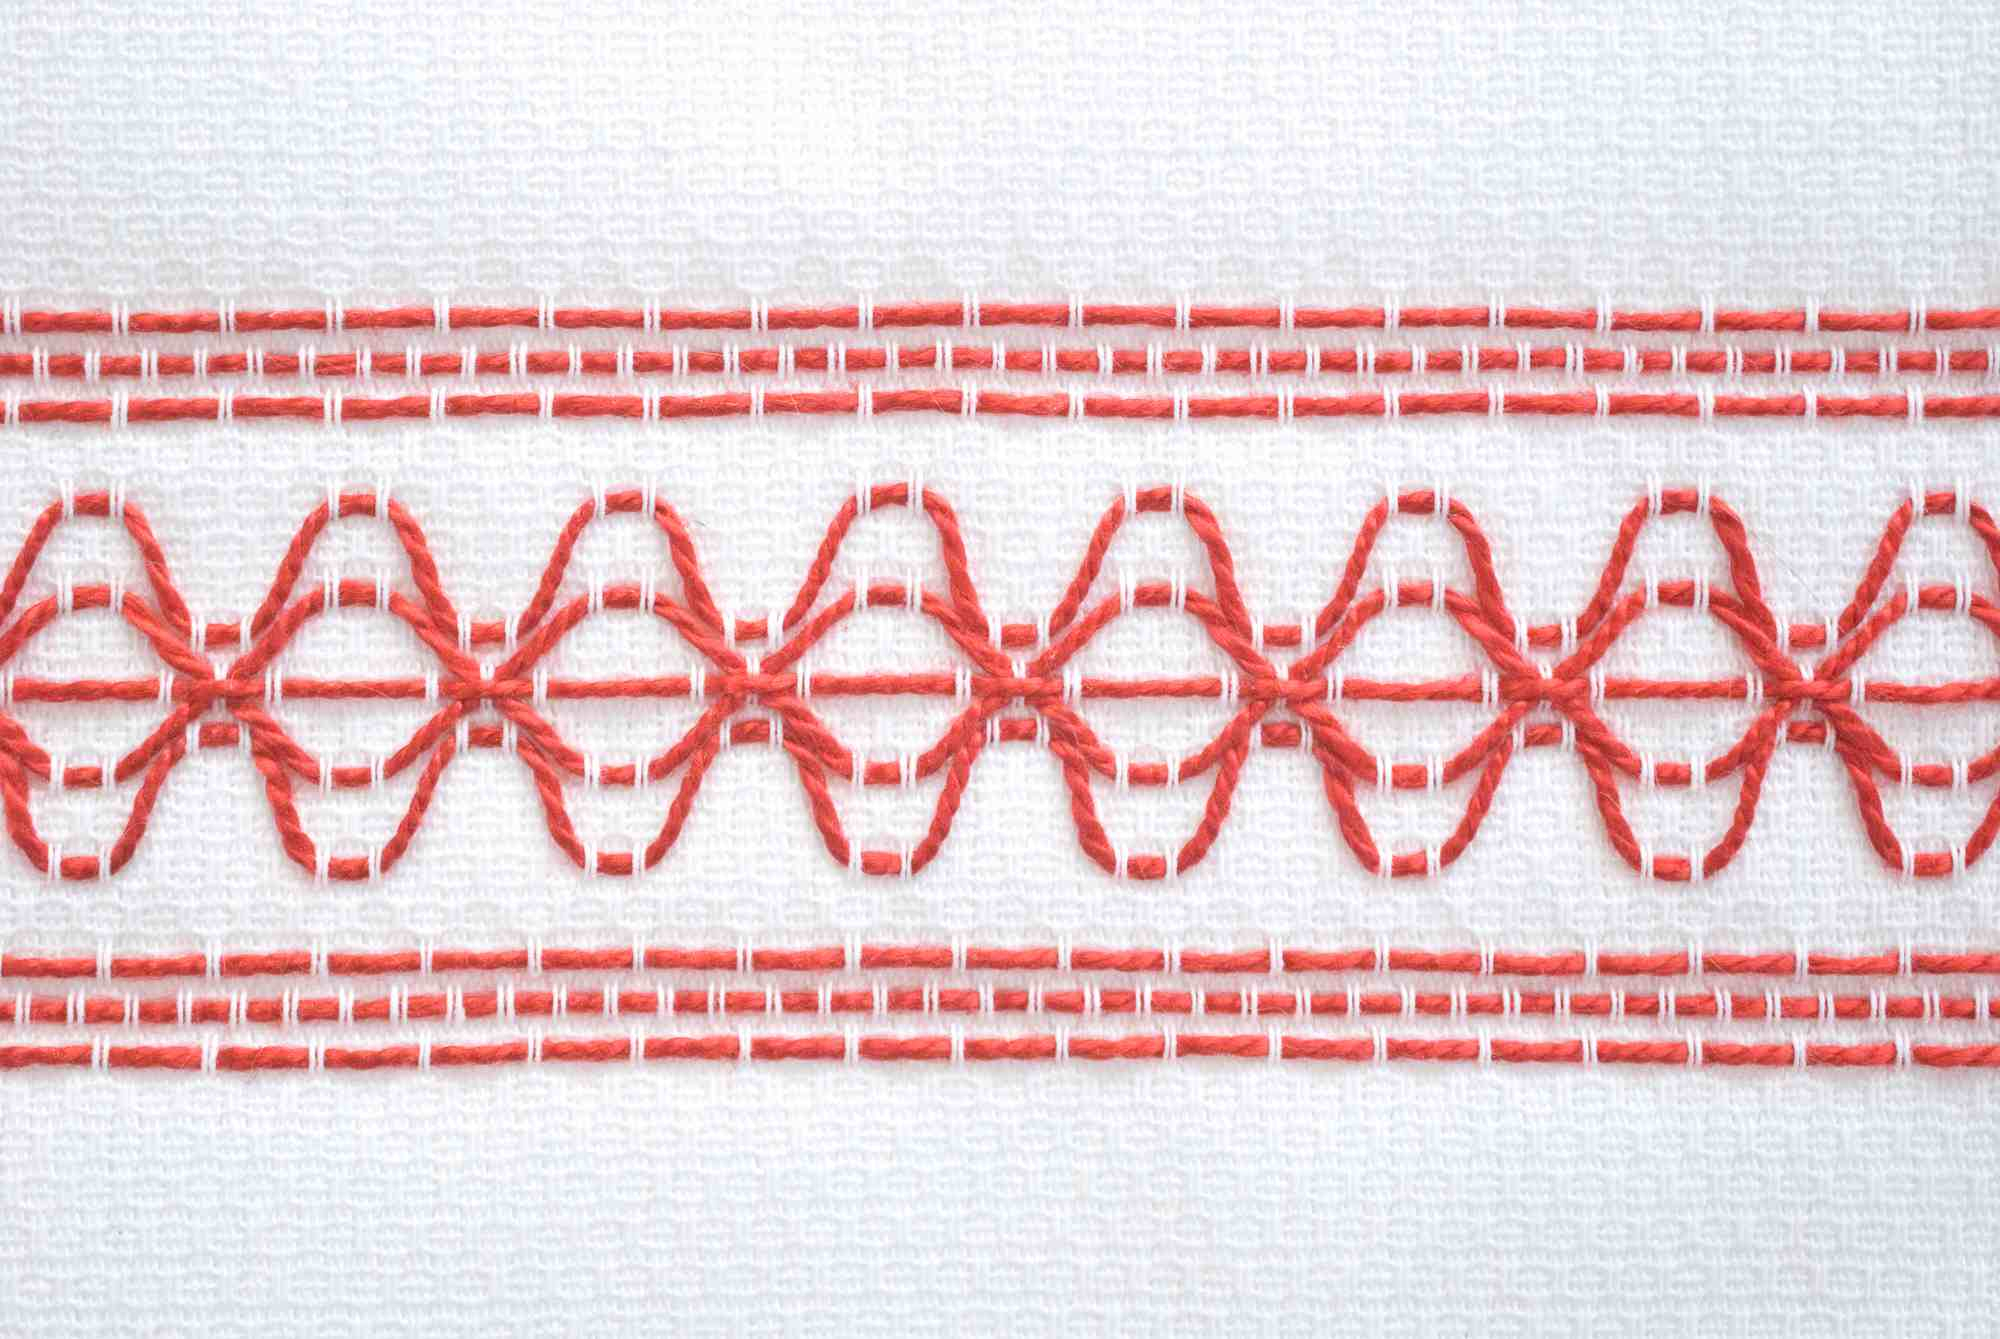 Huck Embroidery Patterns Swedish Huck Embroidery